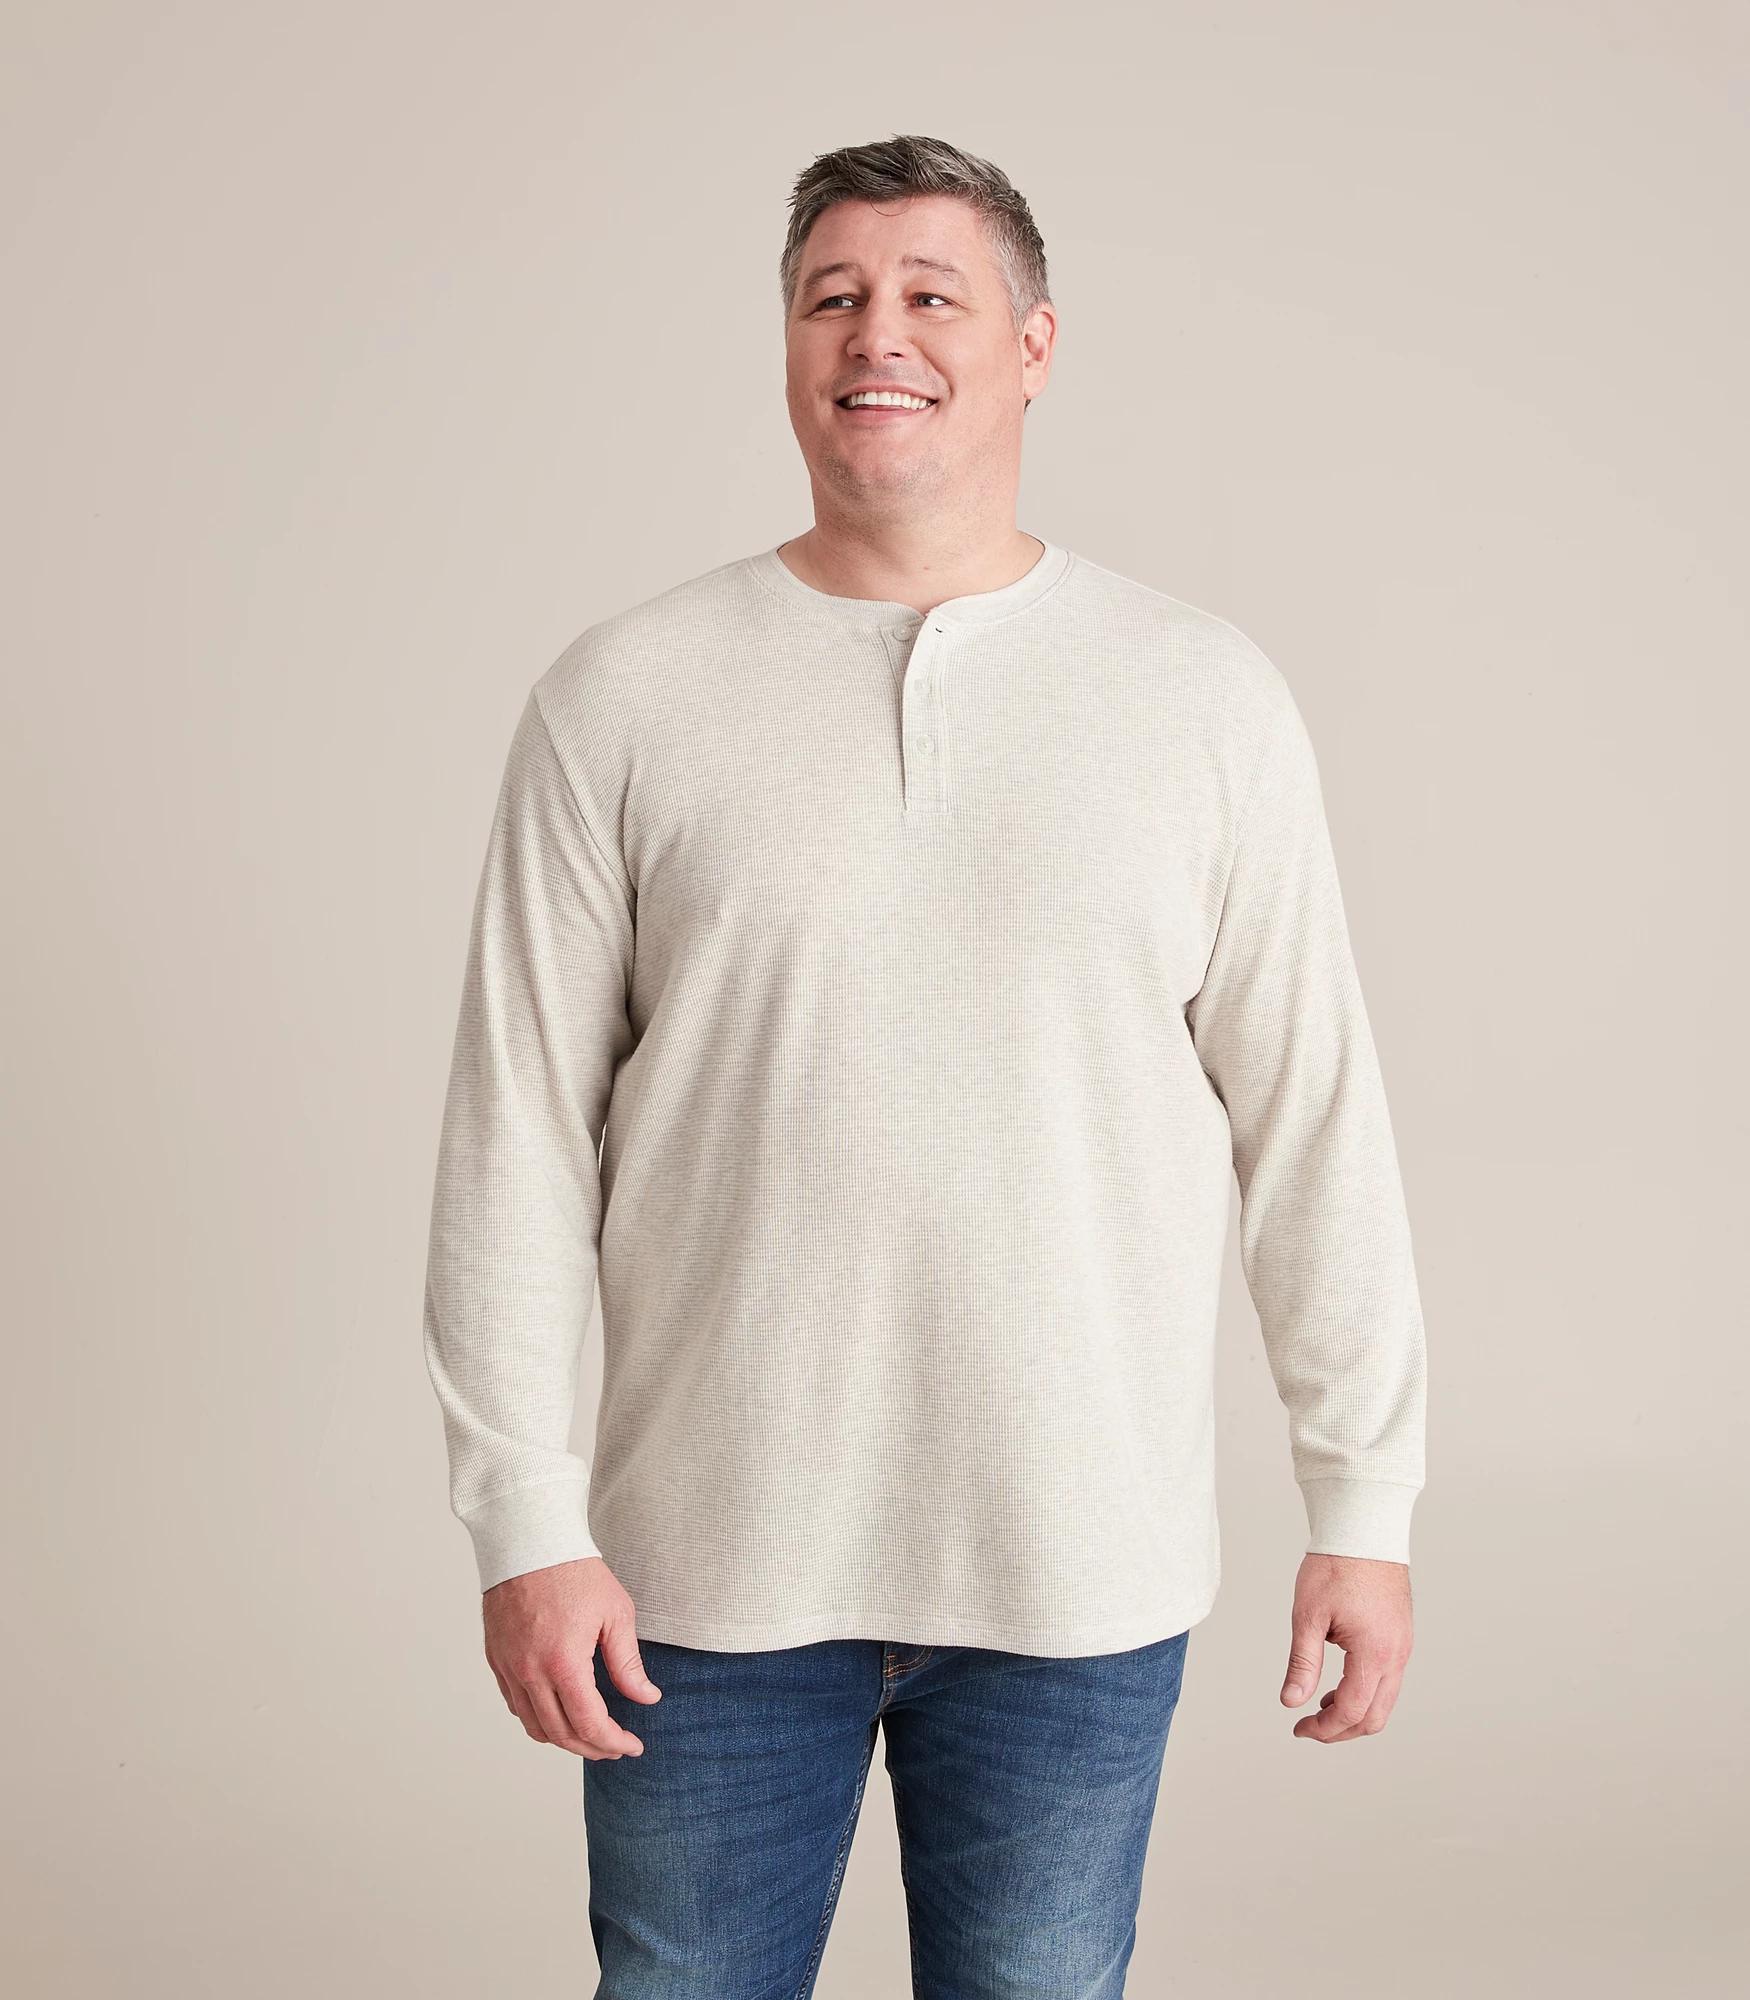 Men's - Organic Cotton Long Sleeve Waffle Henley Top in Brilliant White